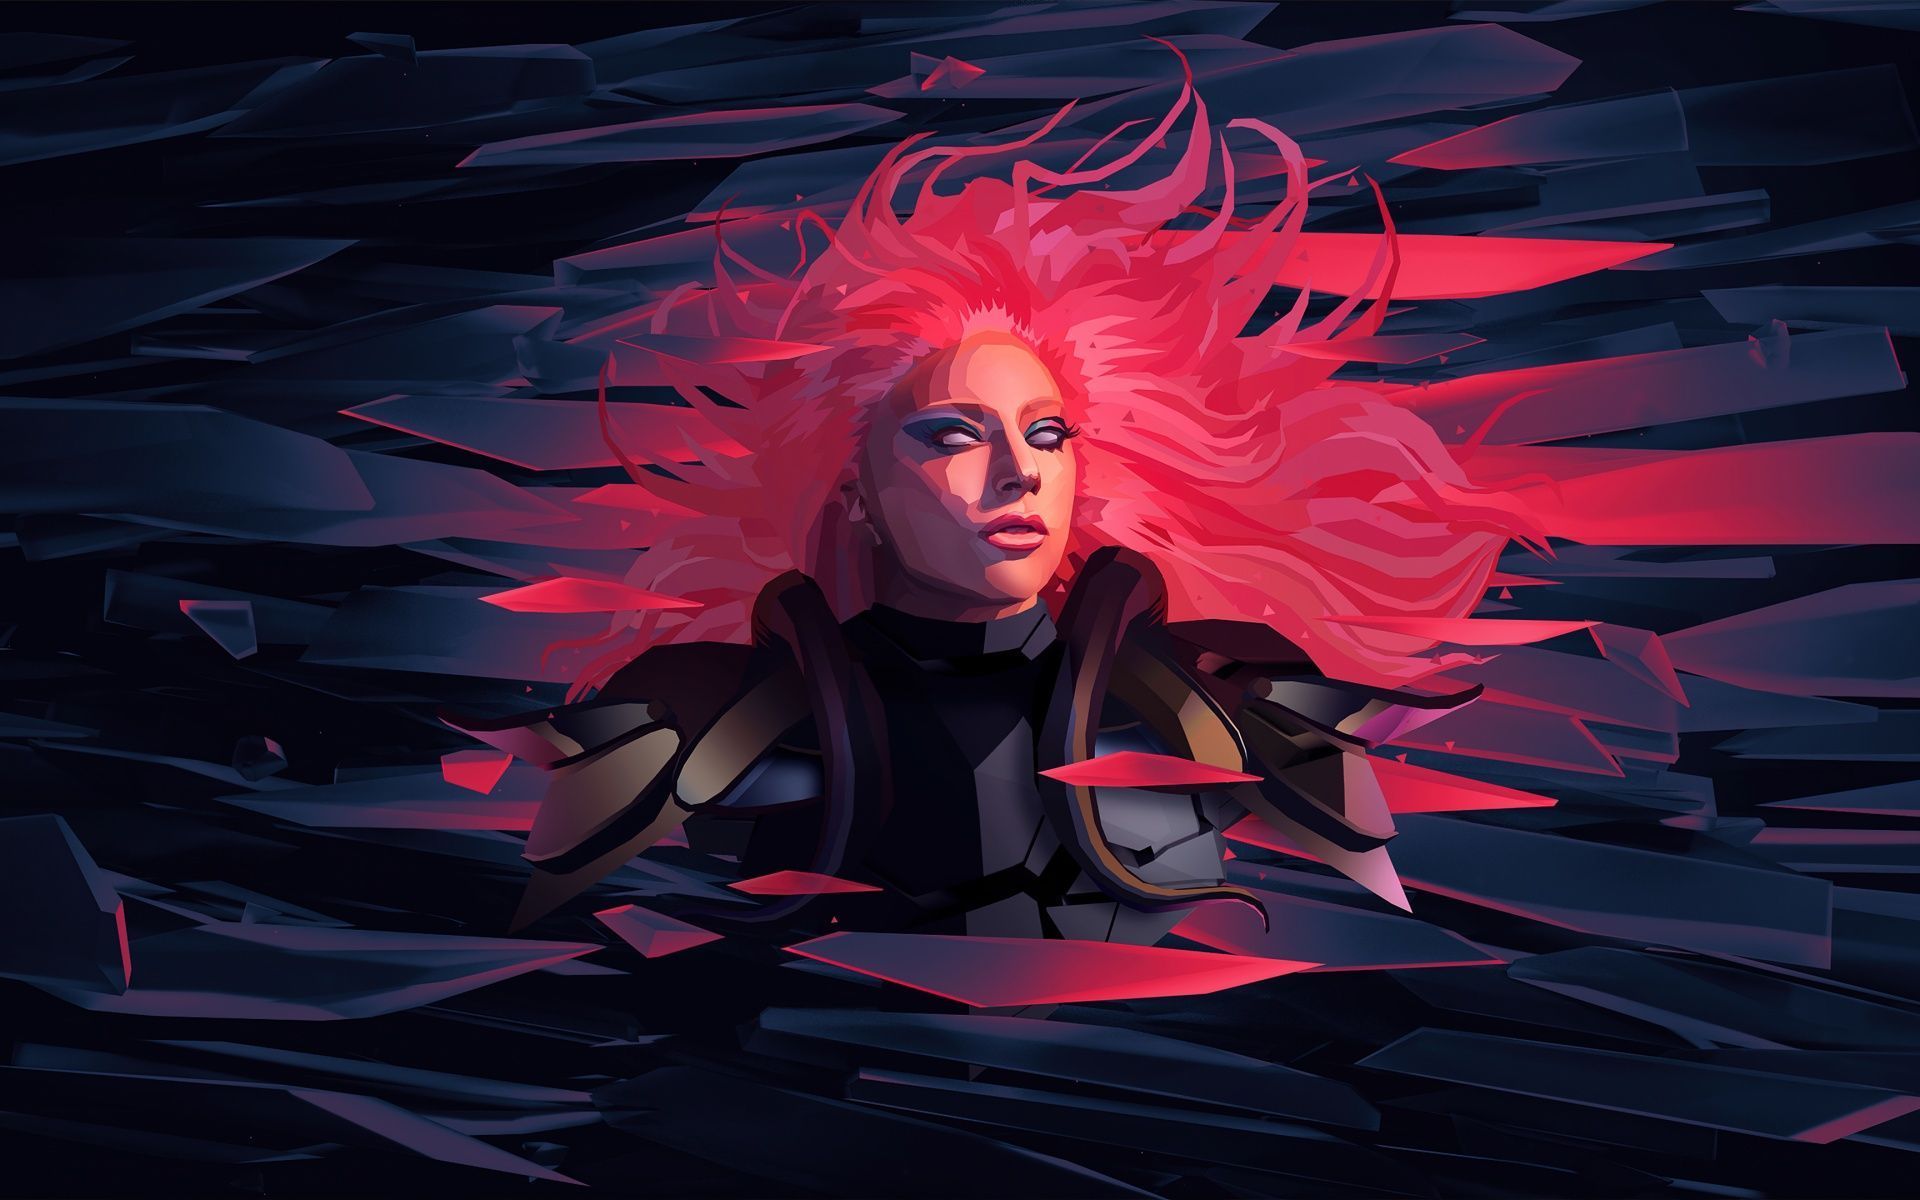 A woman with pink hair is in the middle of broken glass - Low poly